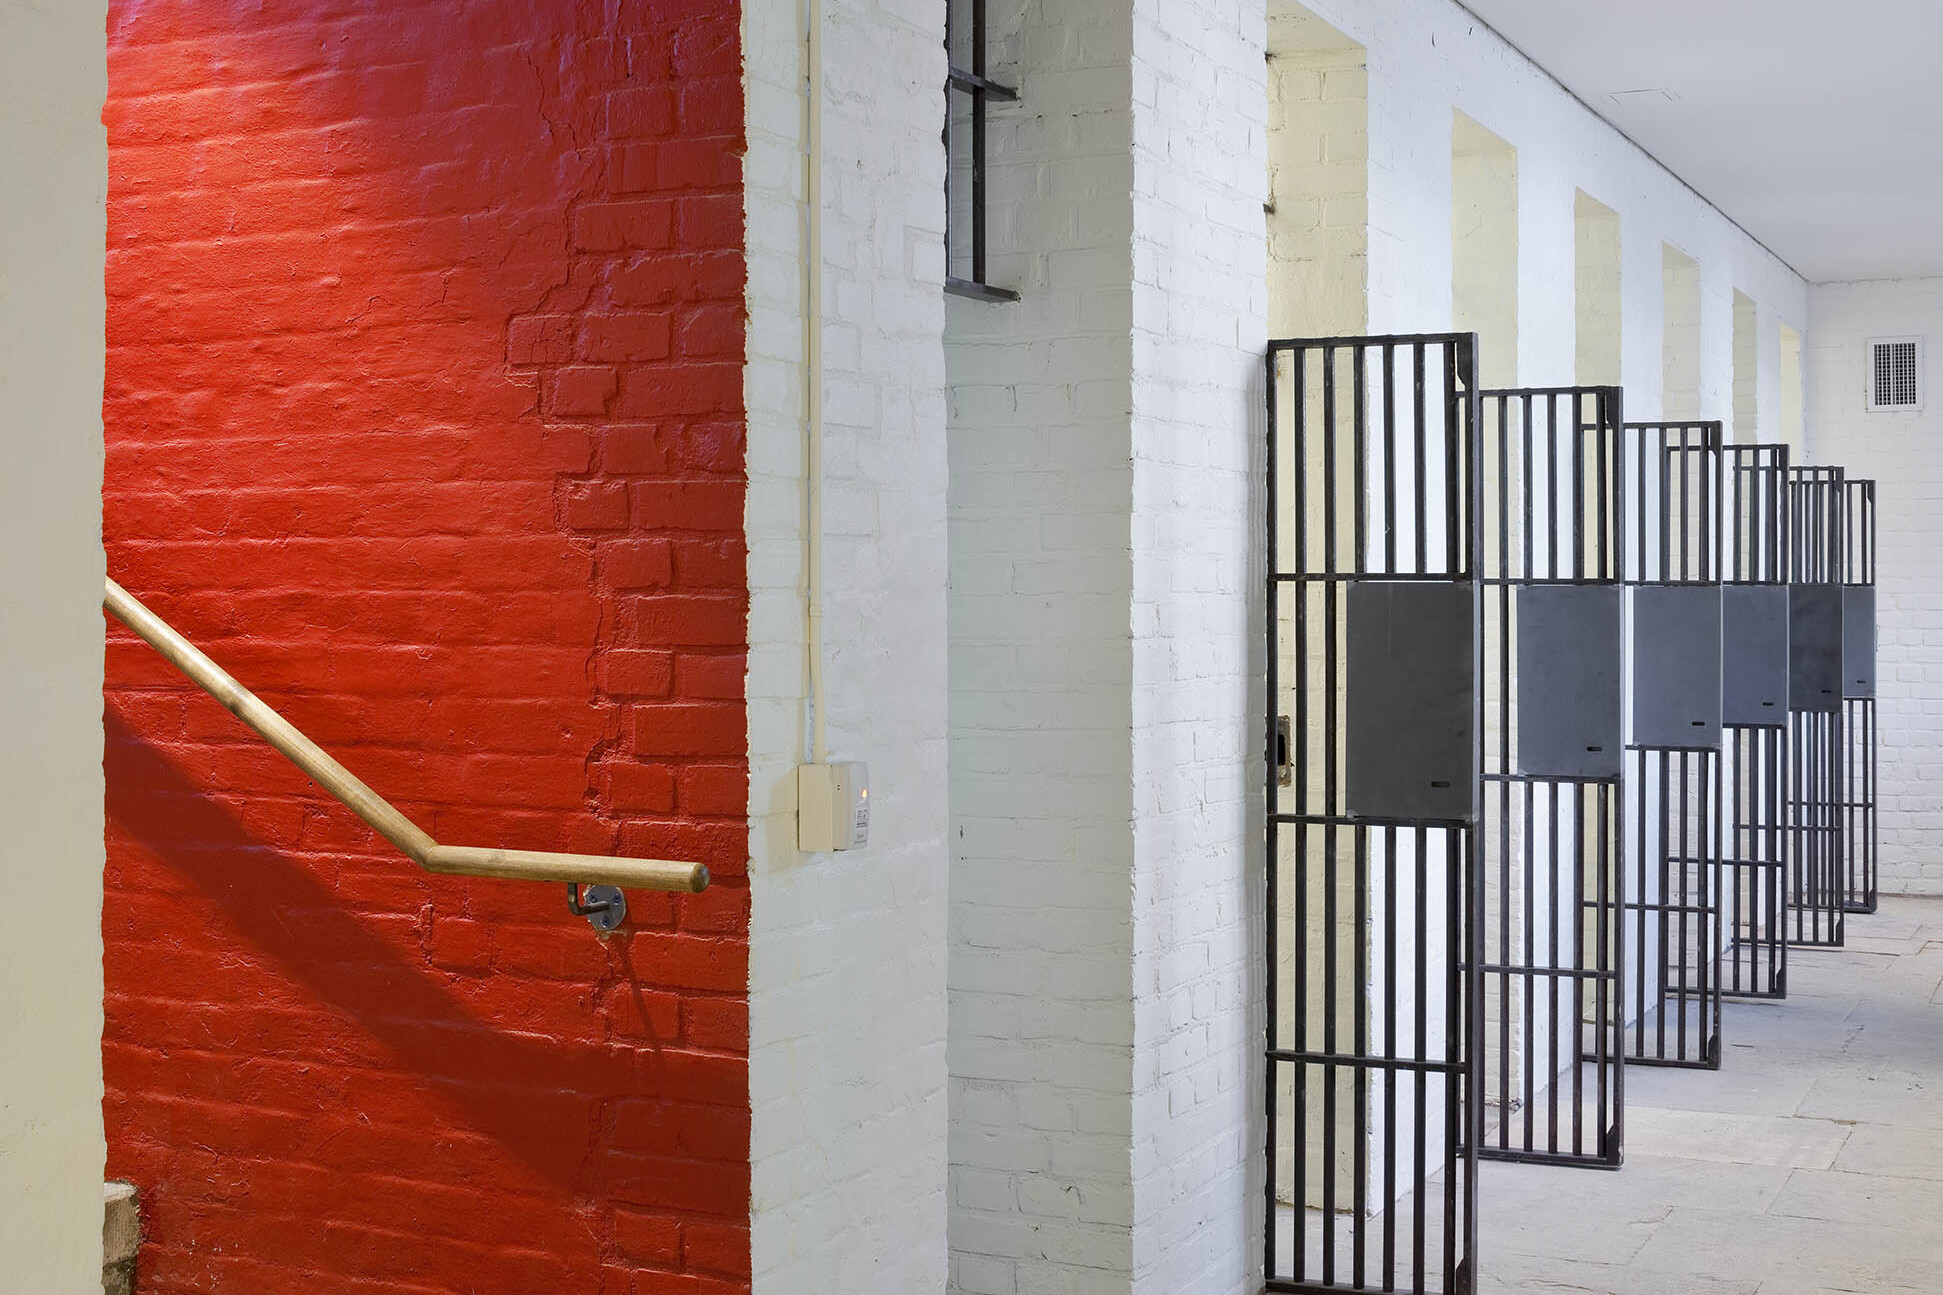 Staircase with red painted brick wall leading to white painted brick corridor with original jail cells with open barred doors